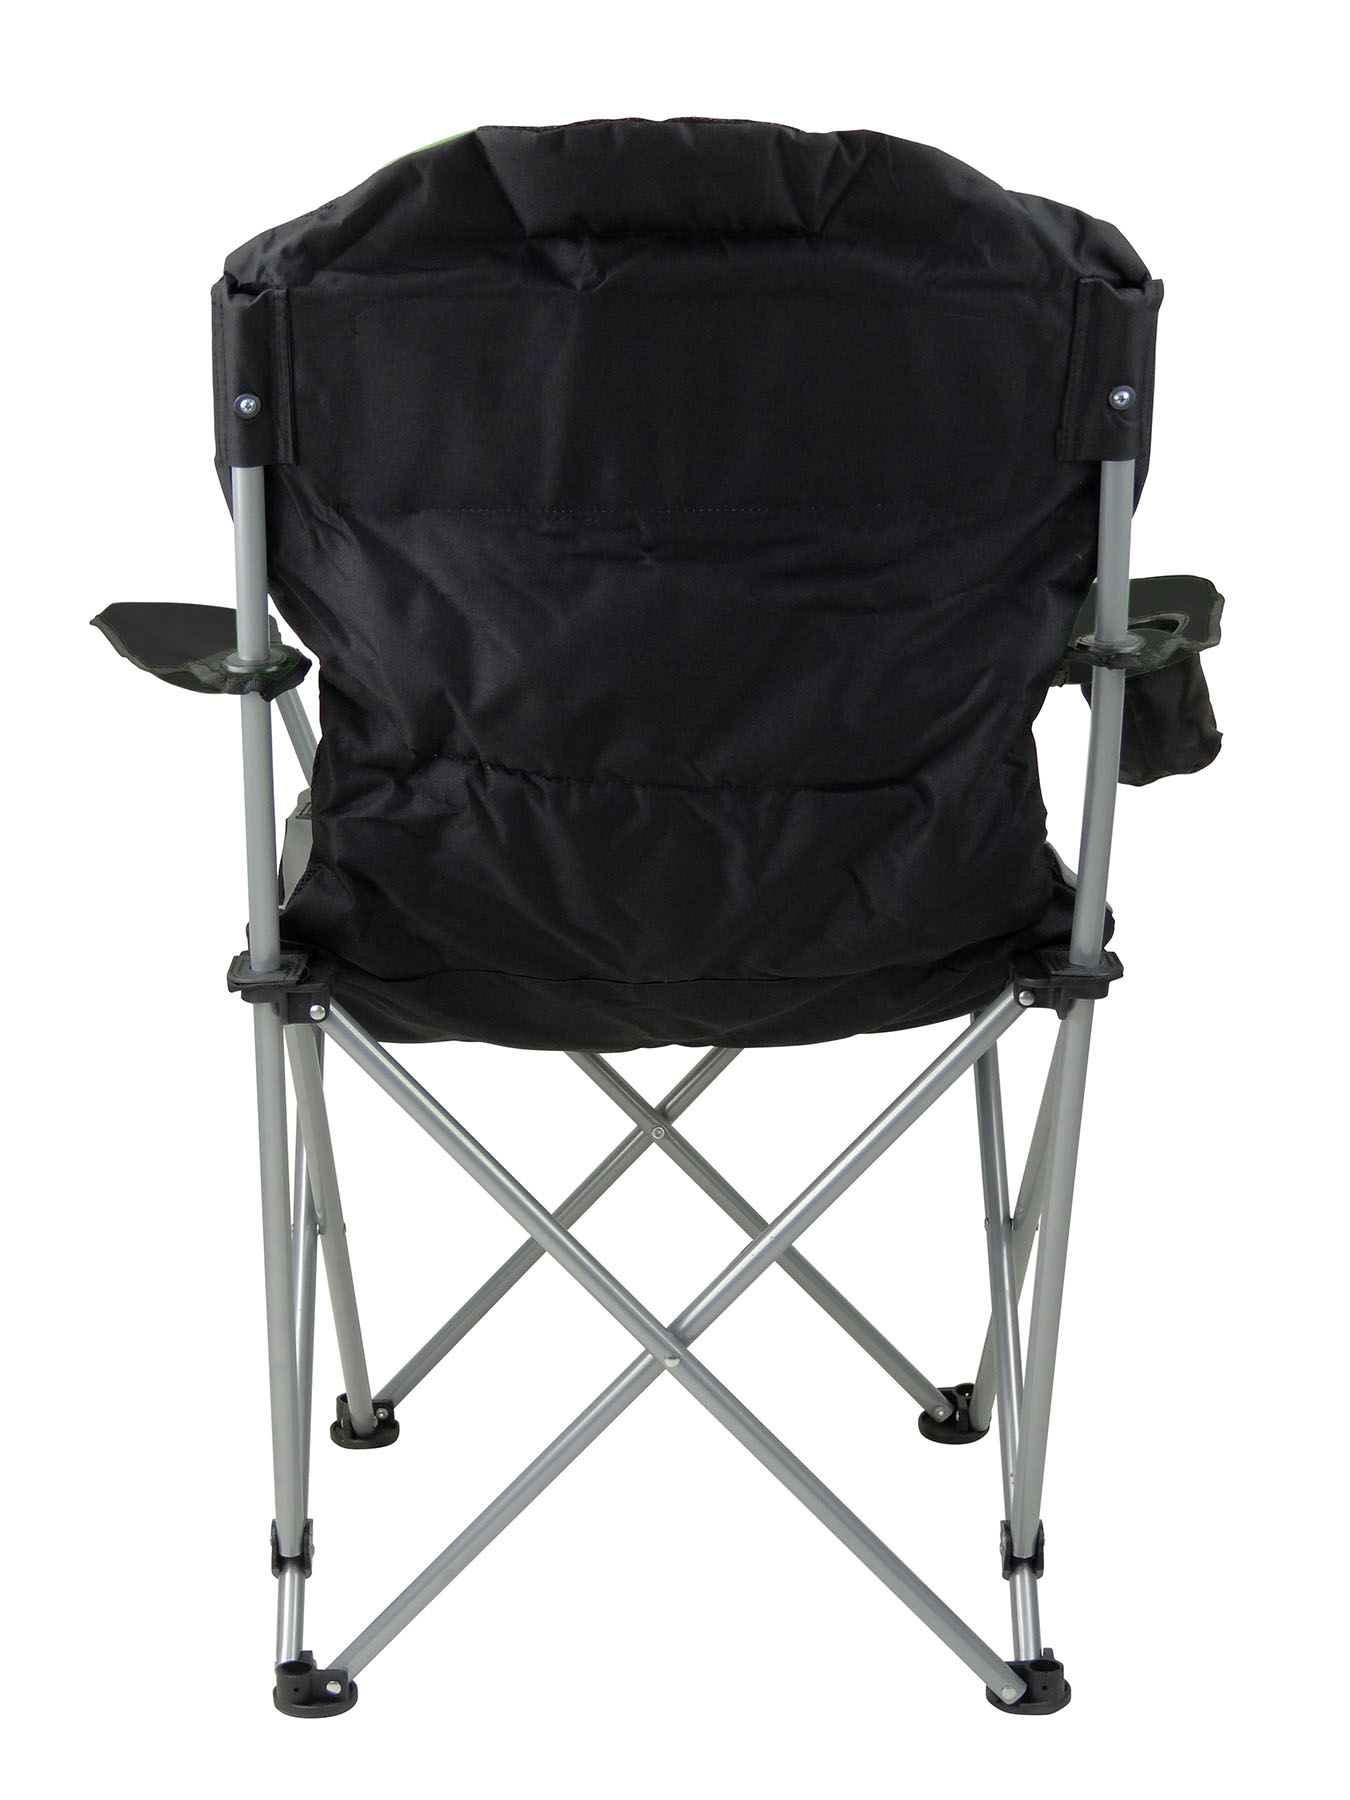 GigaTent Outdoor Camping Chair - Lightweight, Portable Design (Black) - image 2 of 8